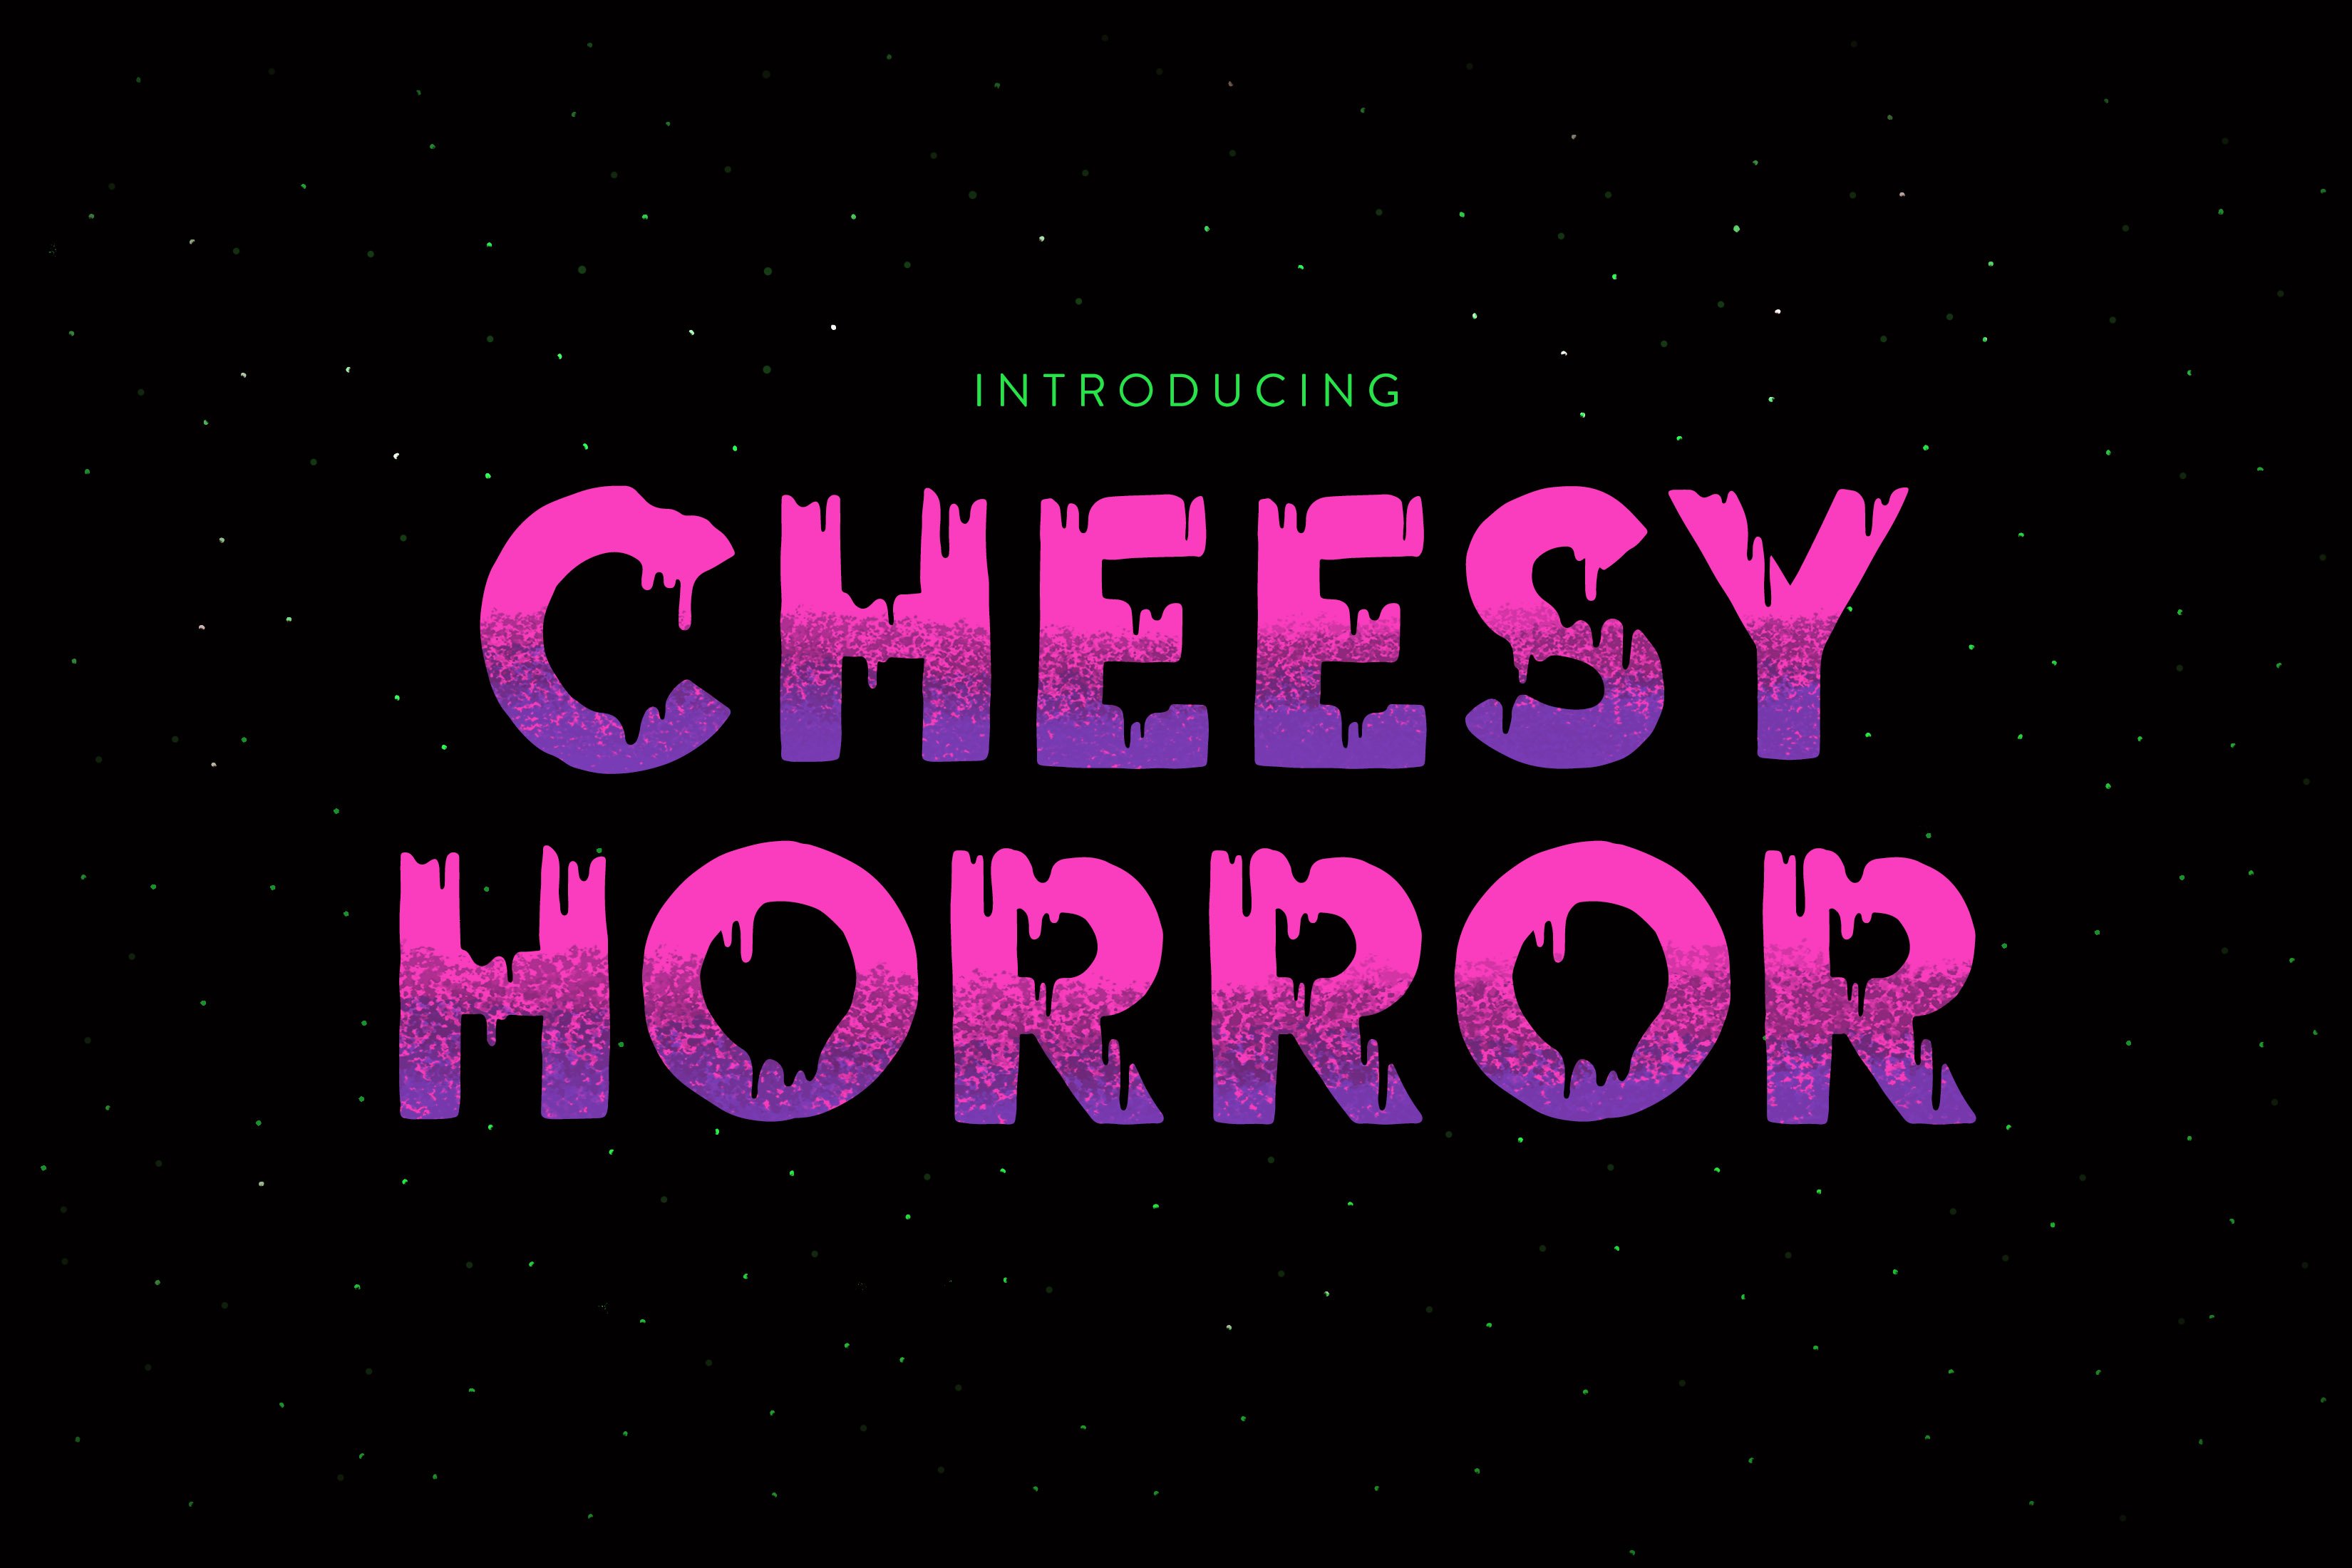 Cheesy Horror Font cover image.